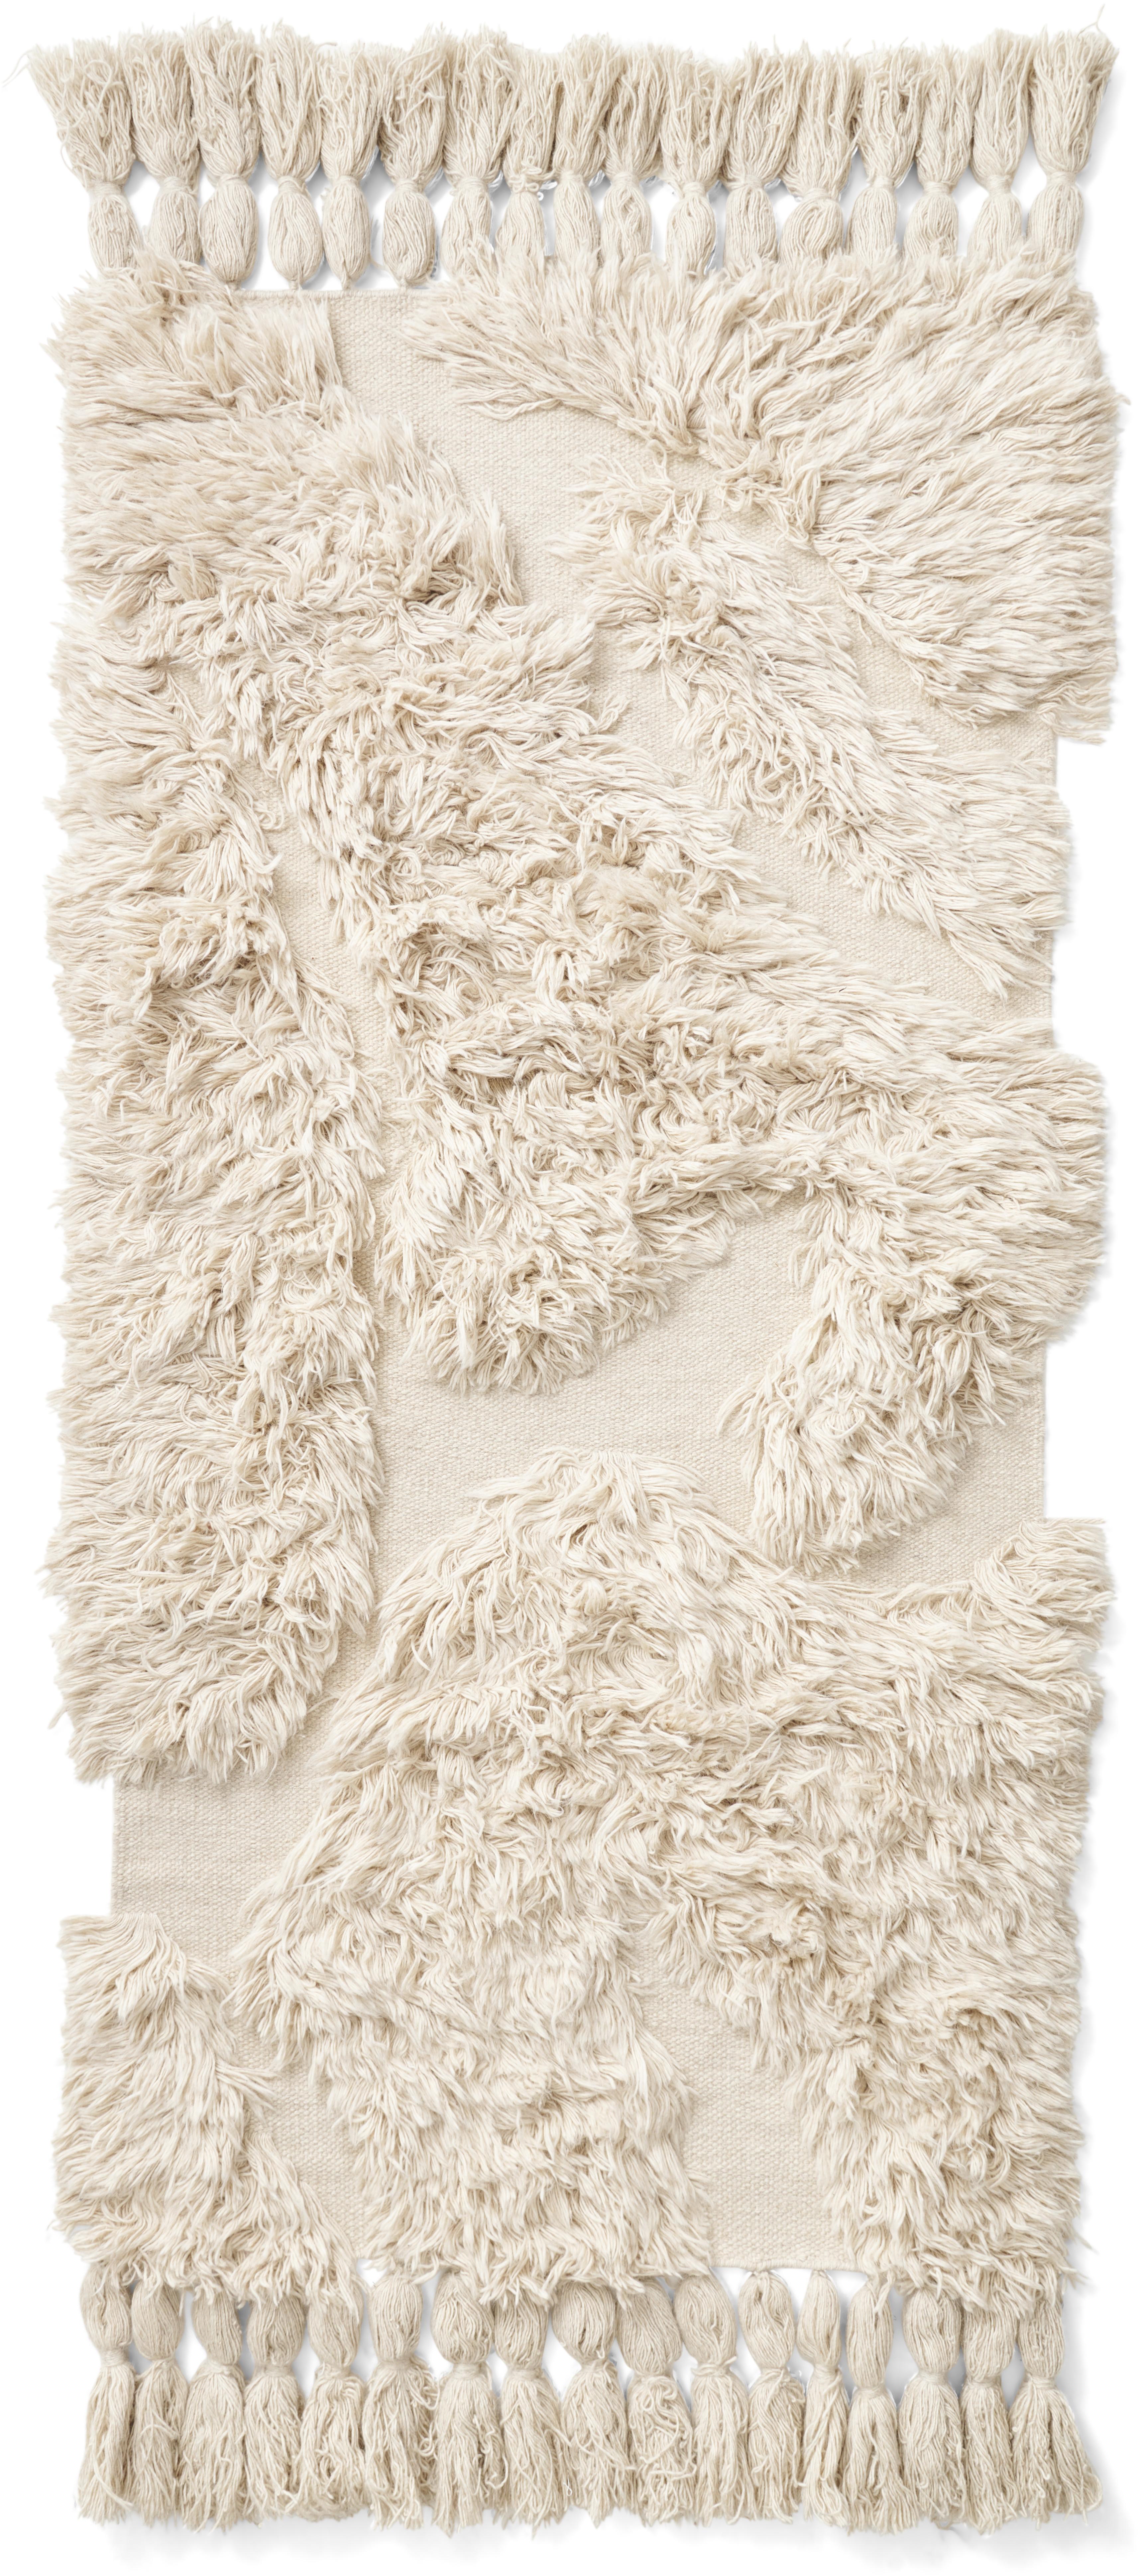 Colonnade no.02 Rug by Cappelen DImyr
Dimensions: D100 x H240
Materials: 85% wool, 15% cotton

Colonnade no.02 is an homage to the understated bohemian elegance that is the signature of Cappelen Dimyr. The soft irregular pattern of highs and